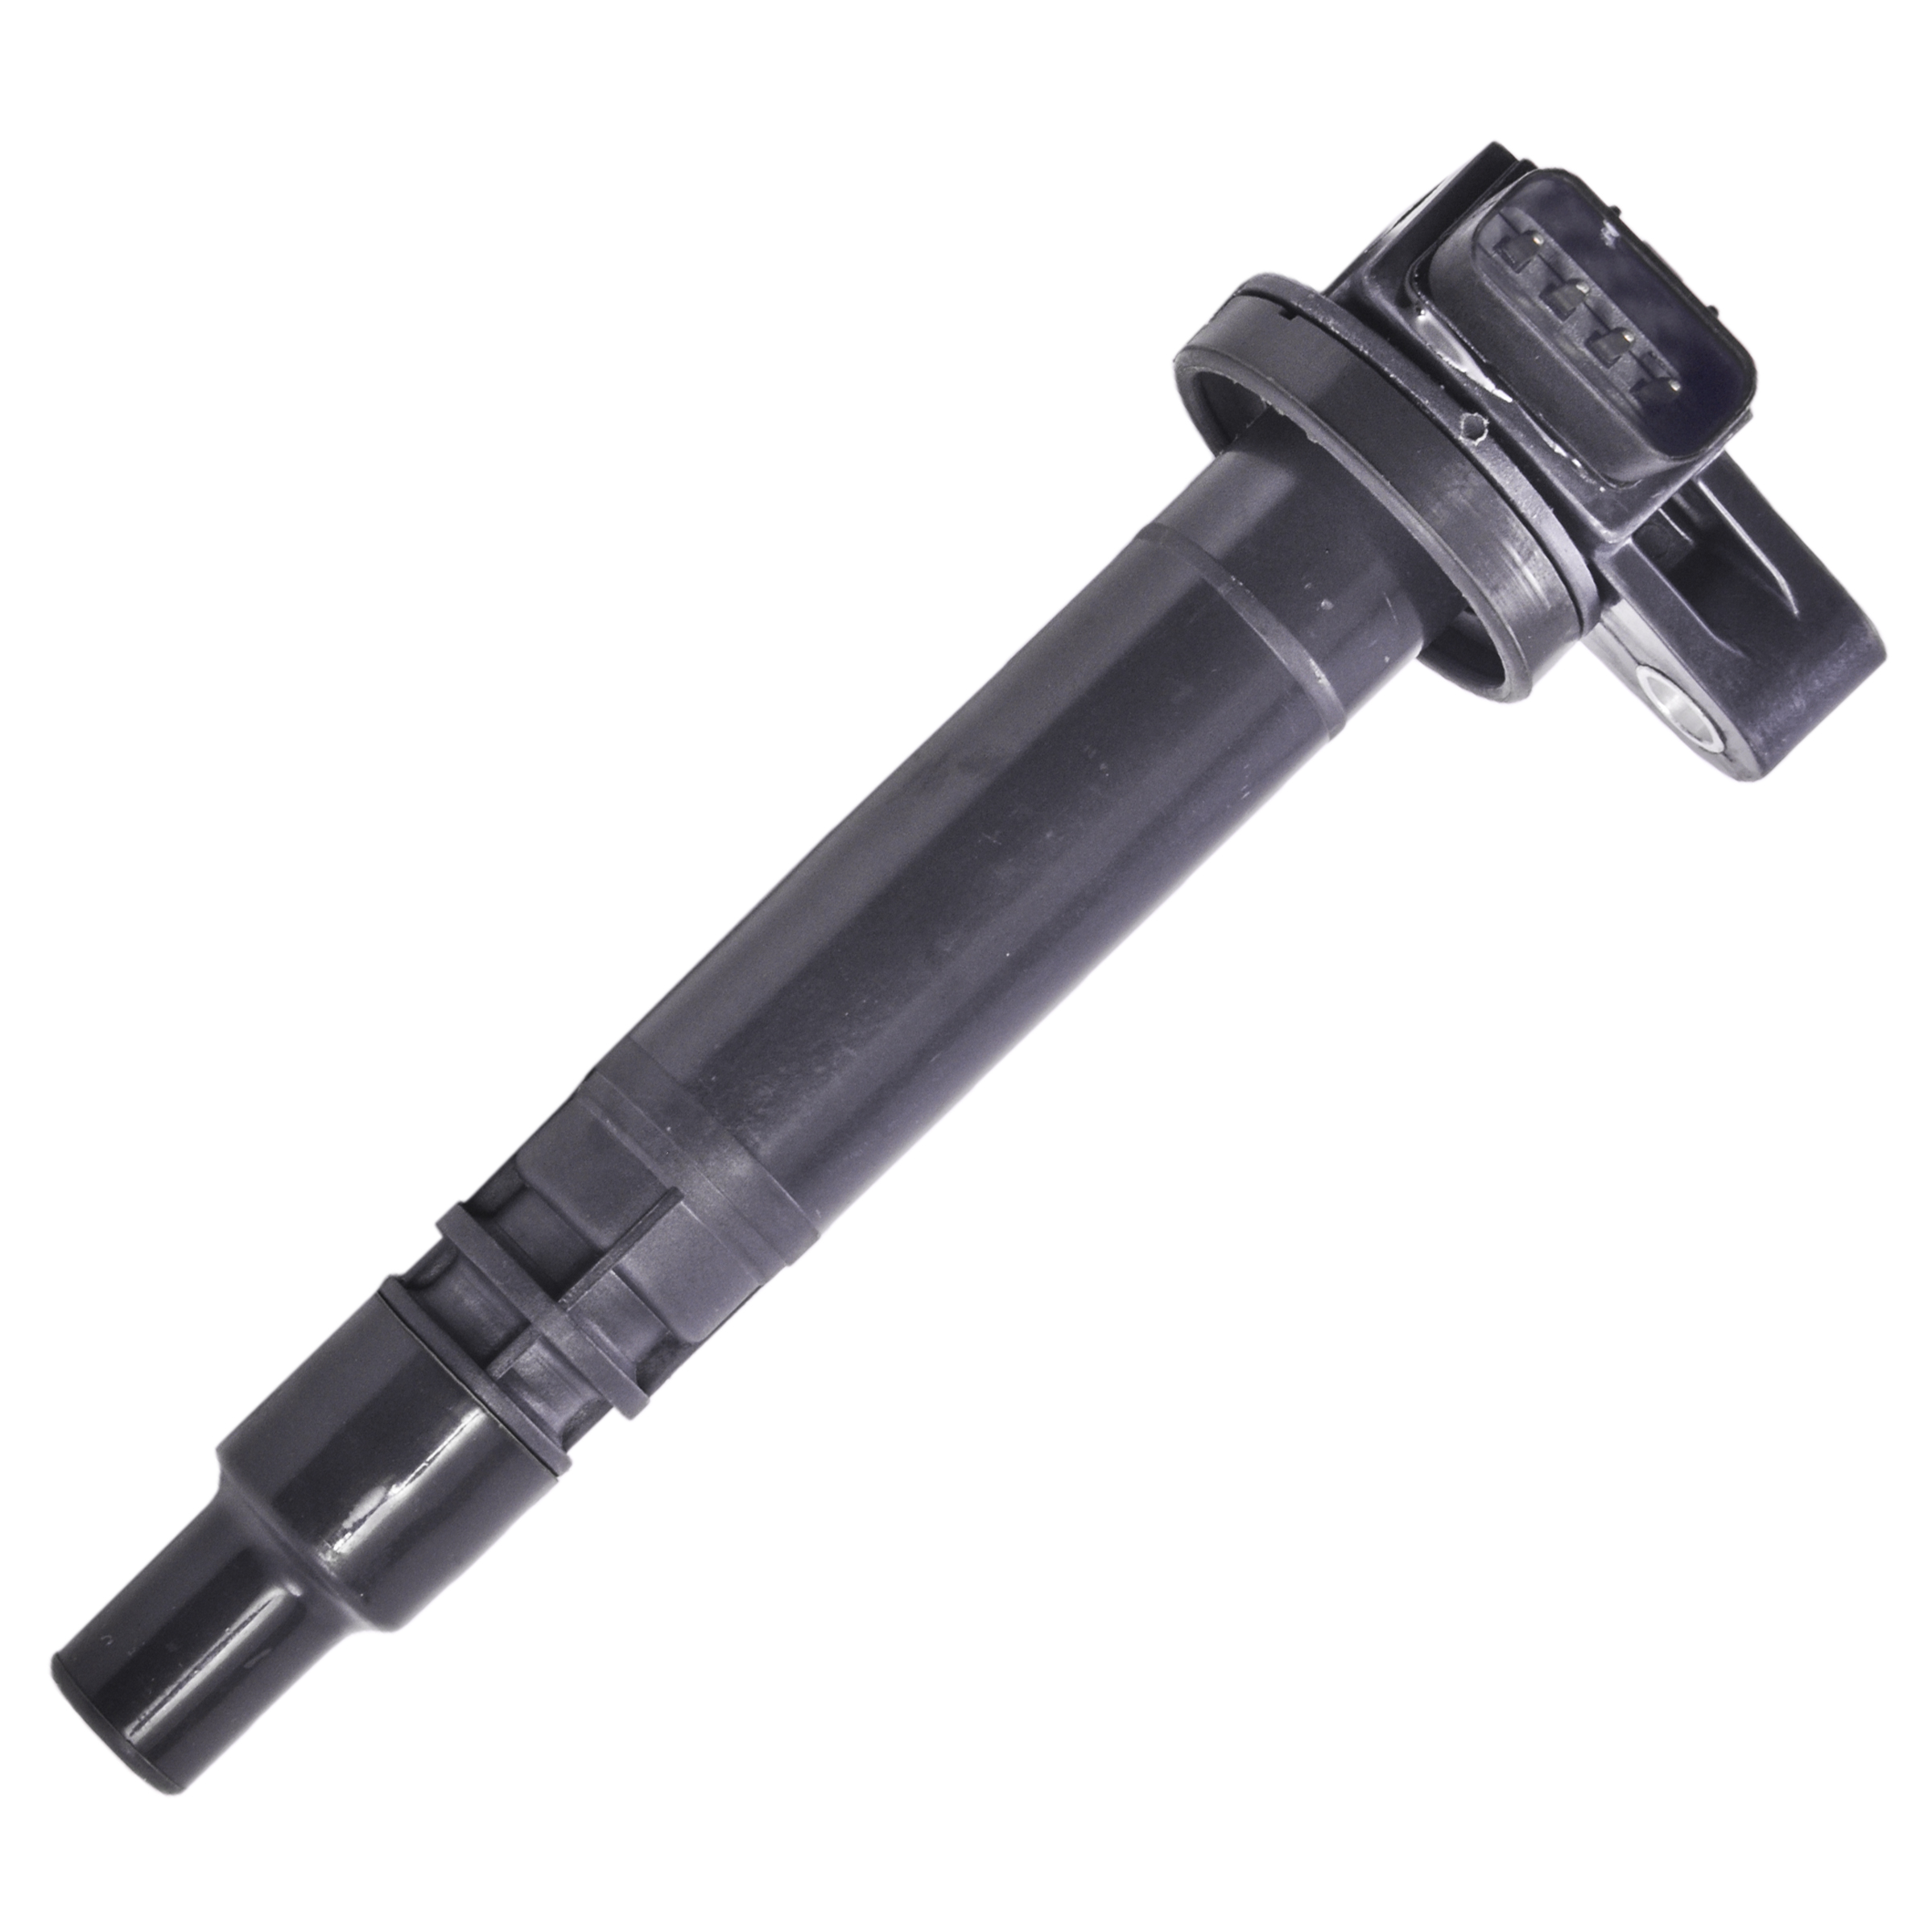 Herko B150 Ignition Coil For Toyota Tacoma 2.4L 2.7L 2000-2004